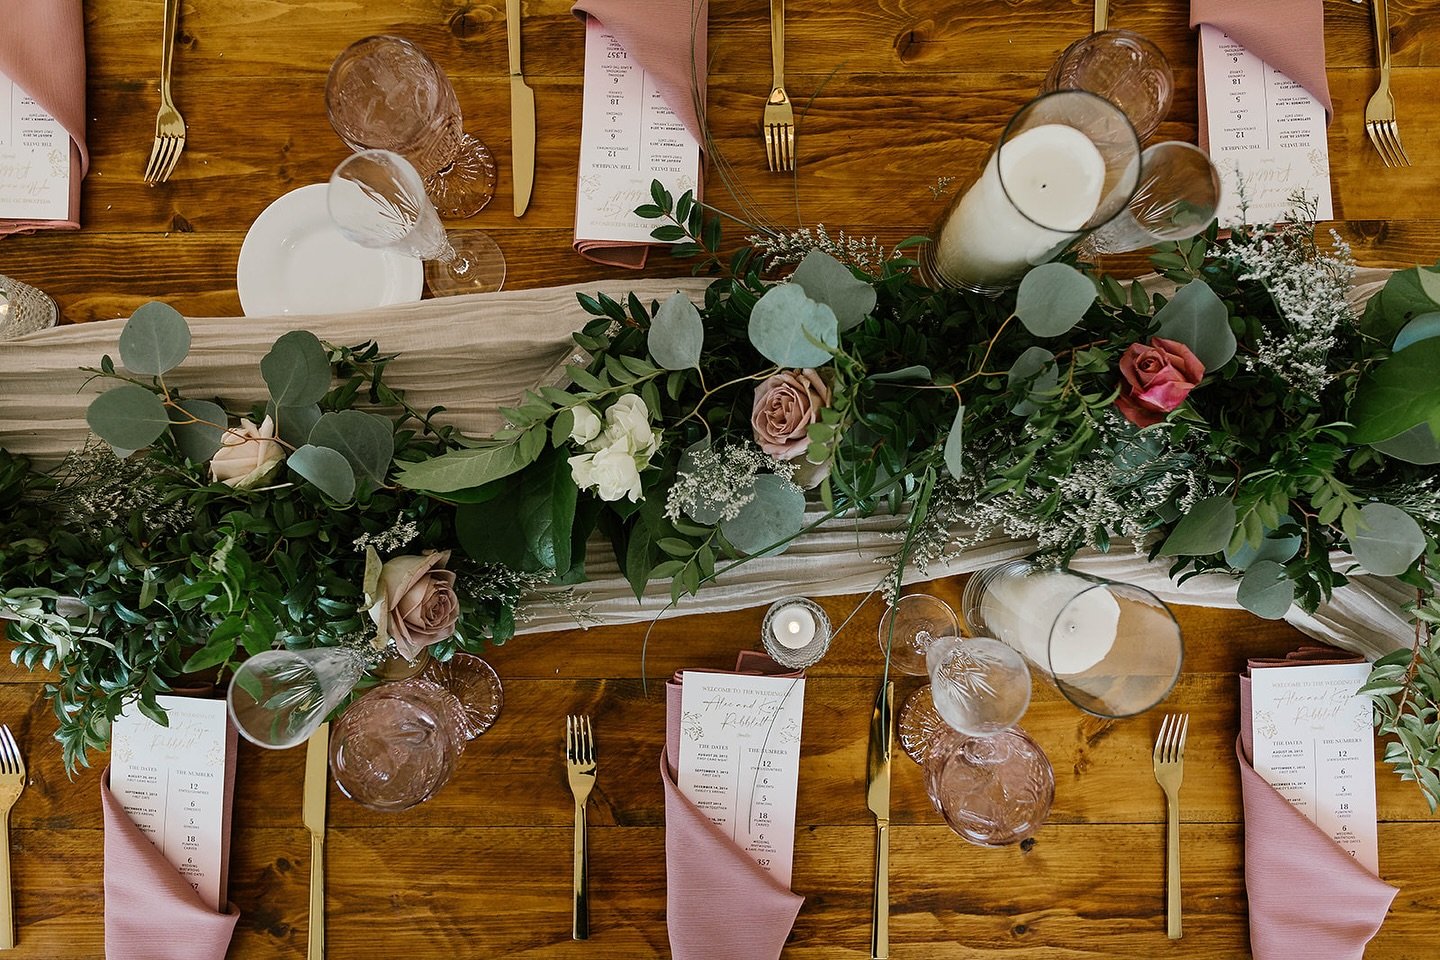 Table scapes are the best place to display your personality! Do you want it to be simple or over the top? One thing is for sure we want it to show the guests we thought about them and their experience! 

Venue: @thewildsvenue
Catering: @owcatering
Ca